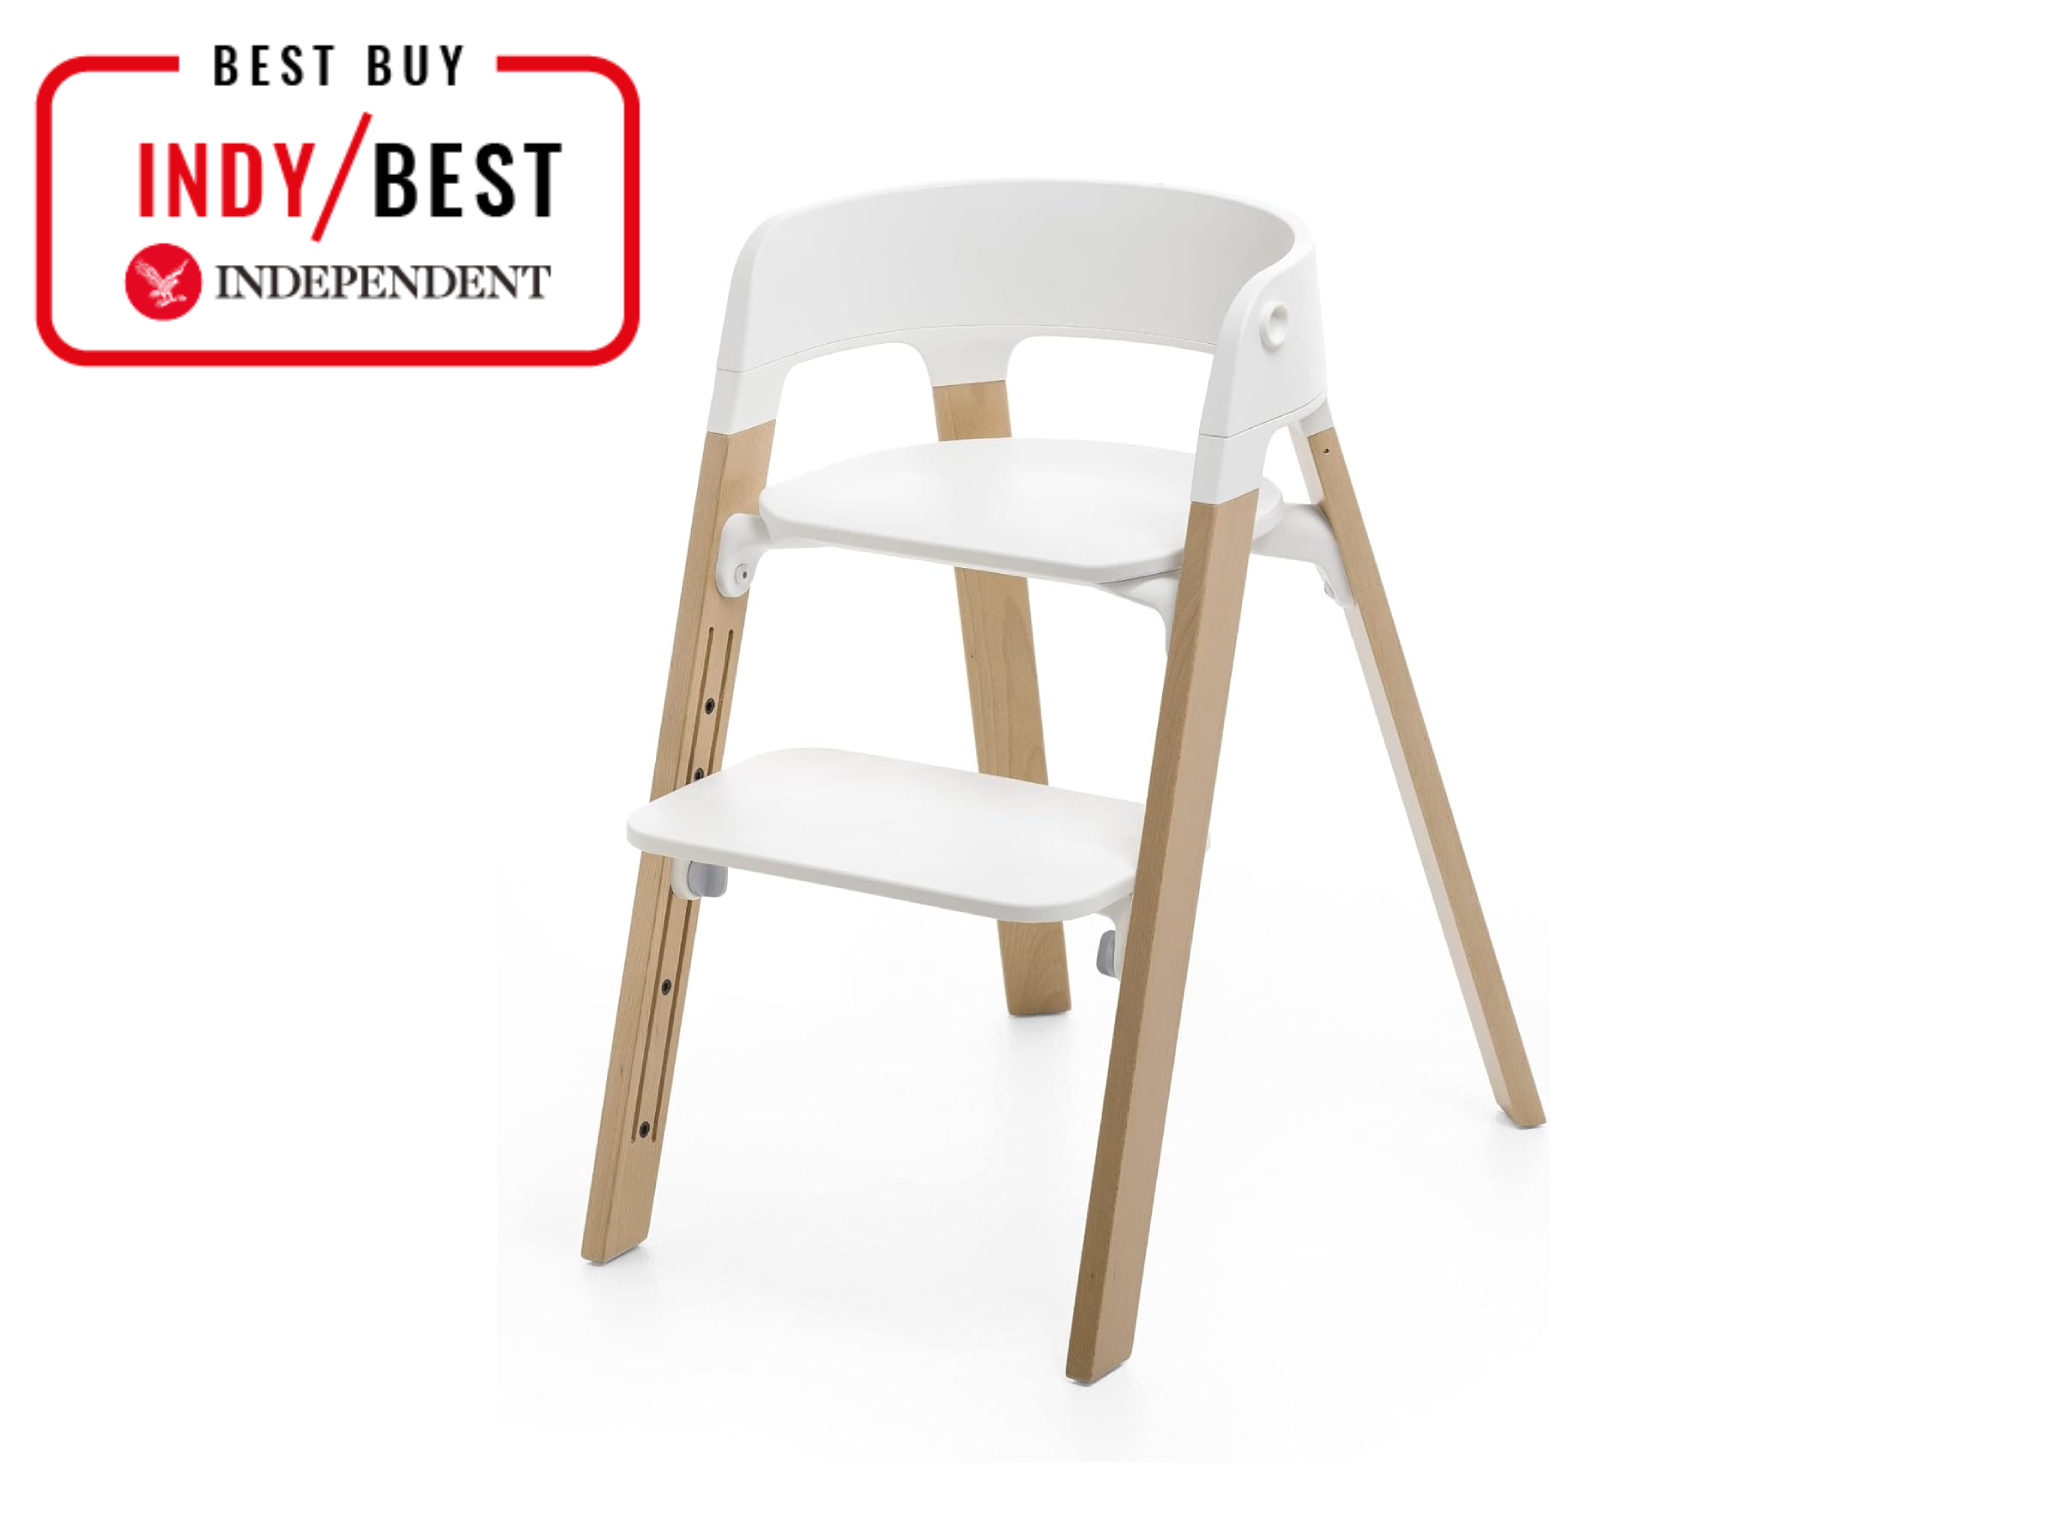 stokke high chair indybest (1).png